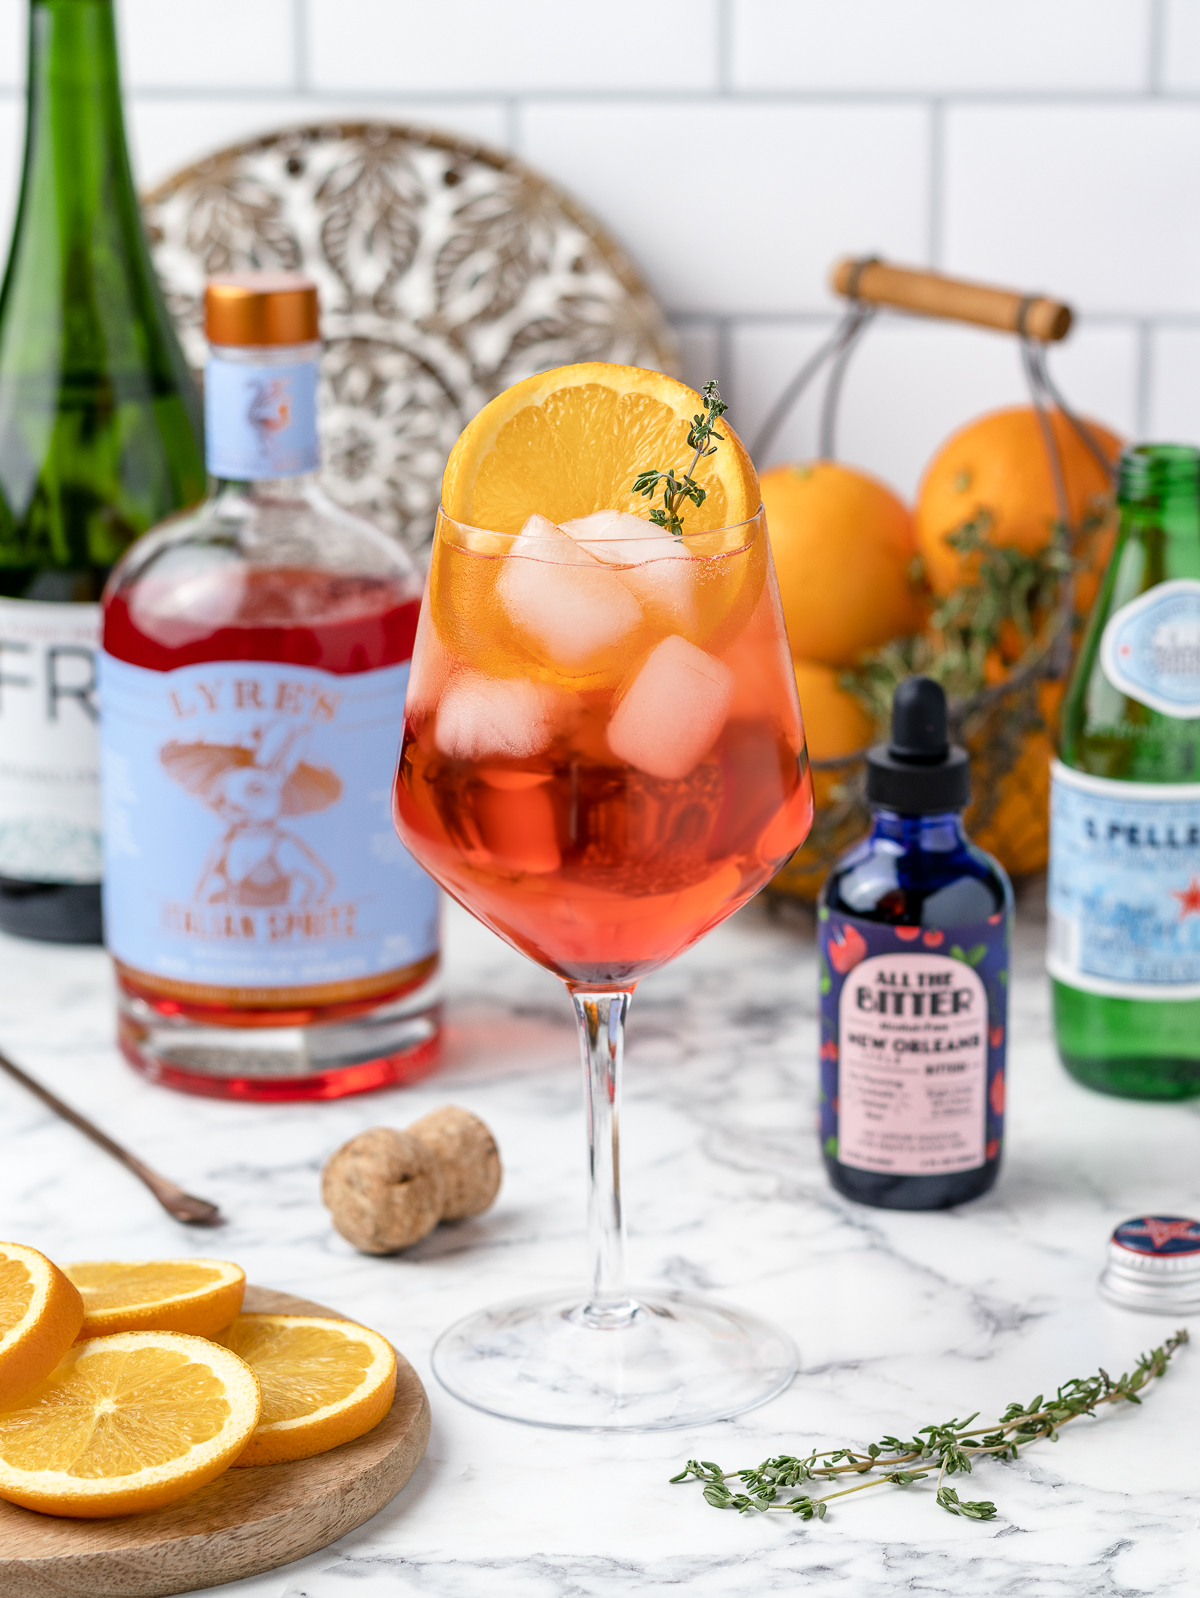 NA Aperol Spritz surrounded by orange slices, thyme, and other ingredients.